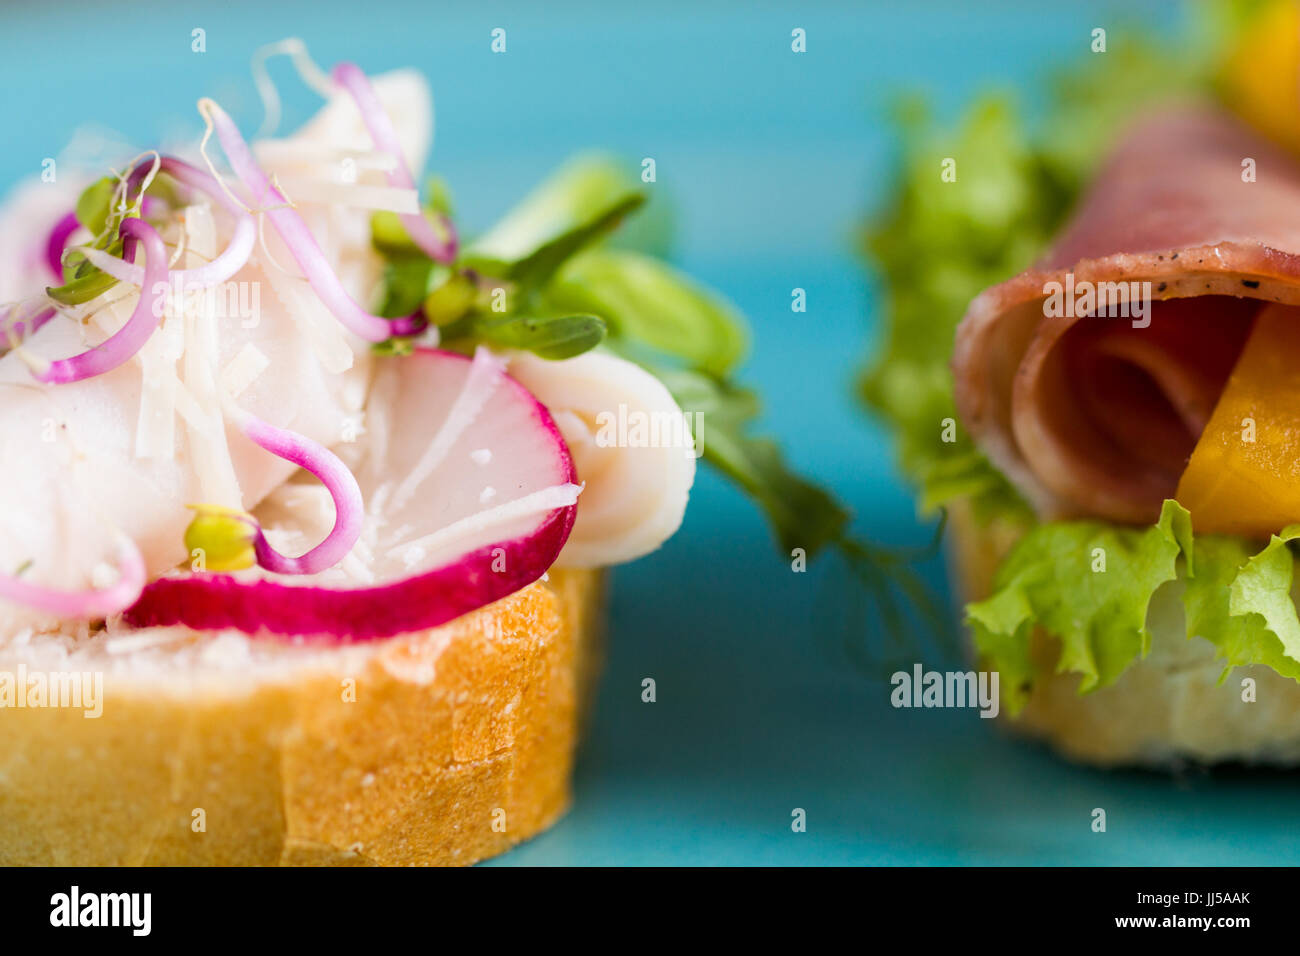 Small sandwiches for quick break time Stock Photo Alamy